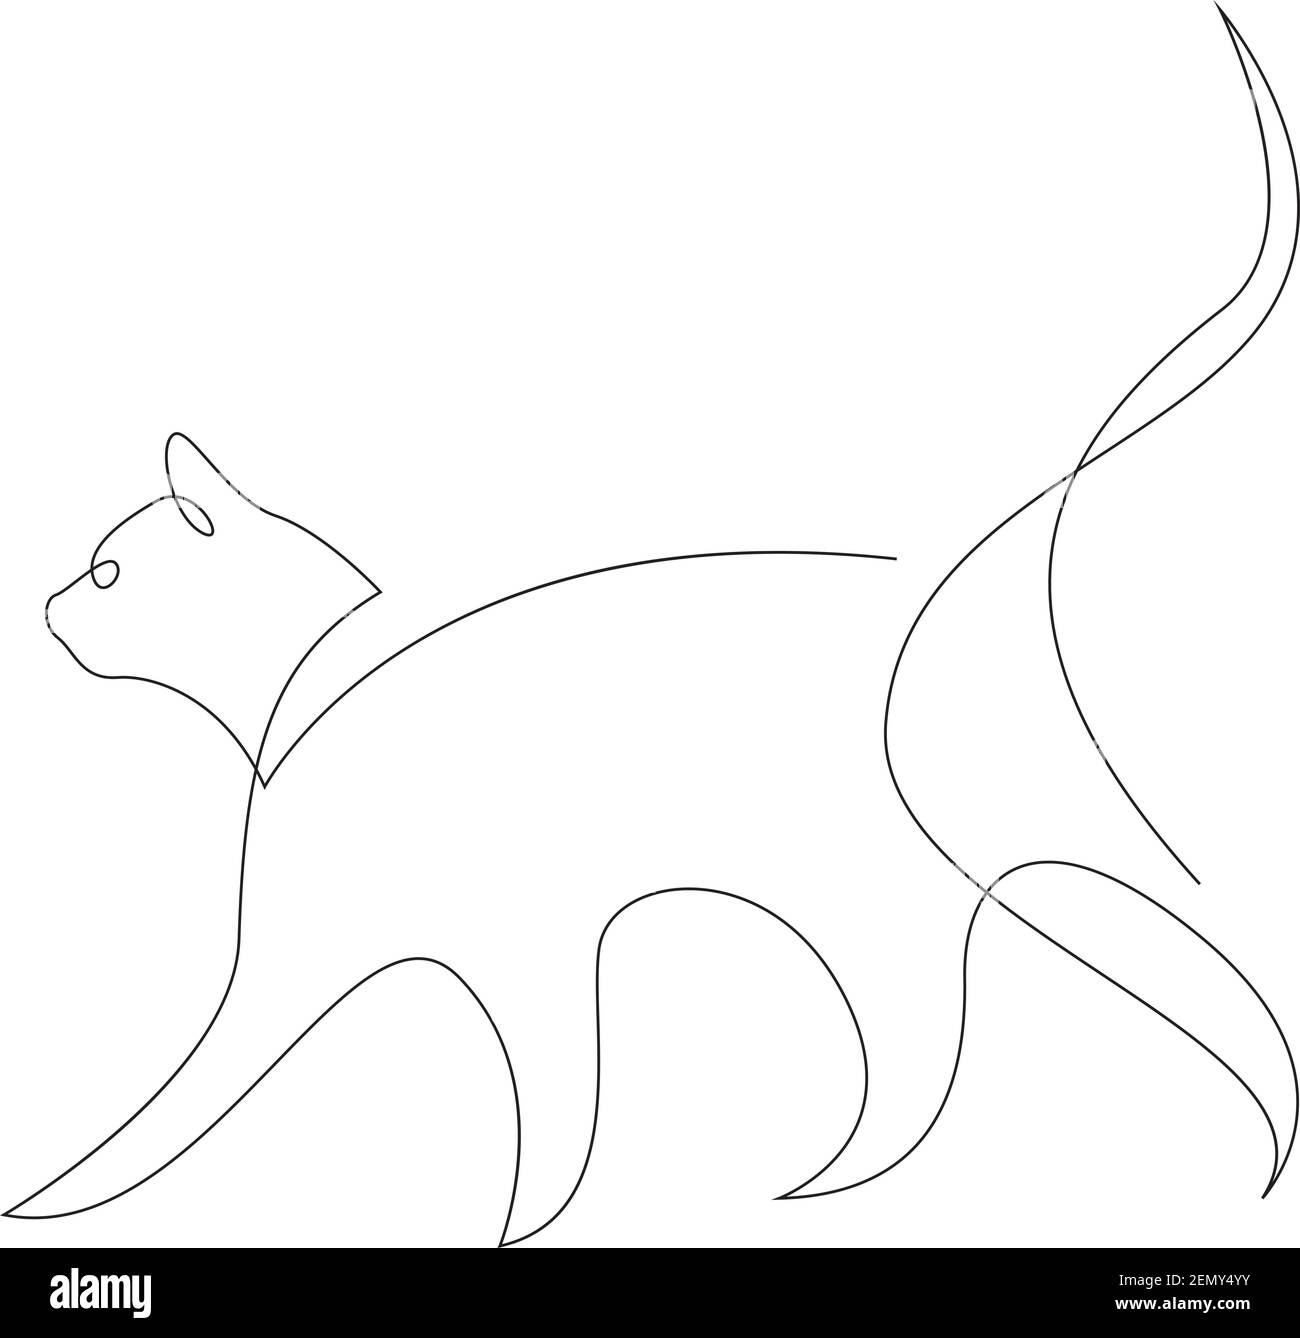 One line cat design silhouette. Hand drawn minimalism style vector illustration Stock Vector